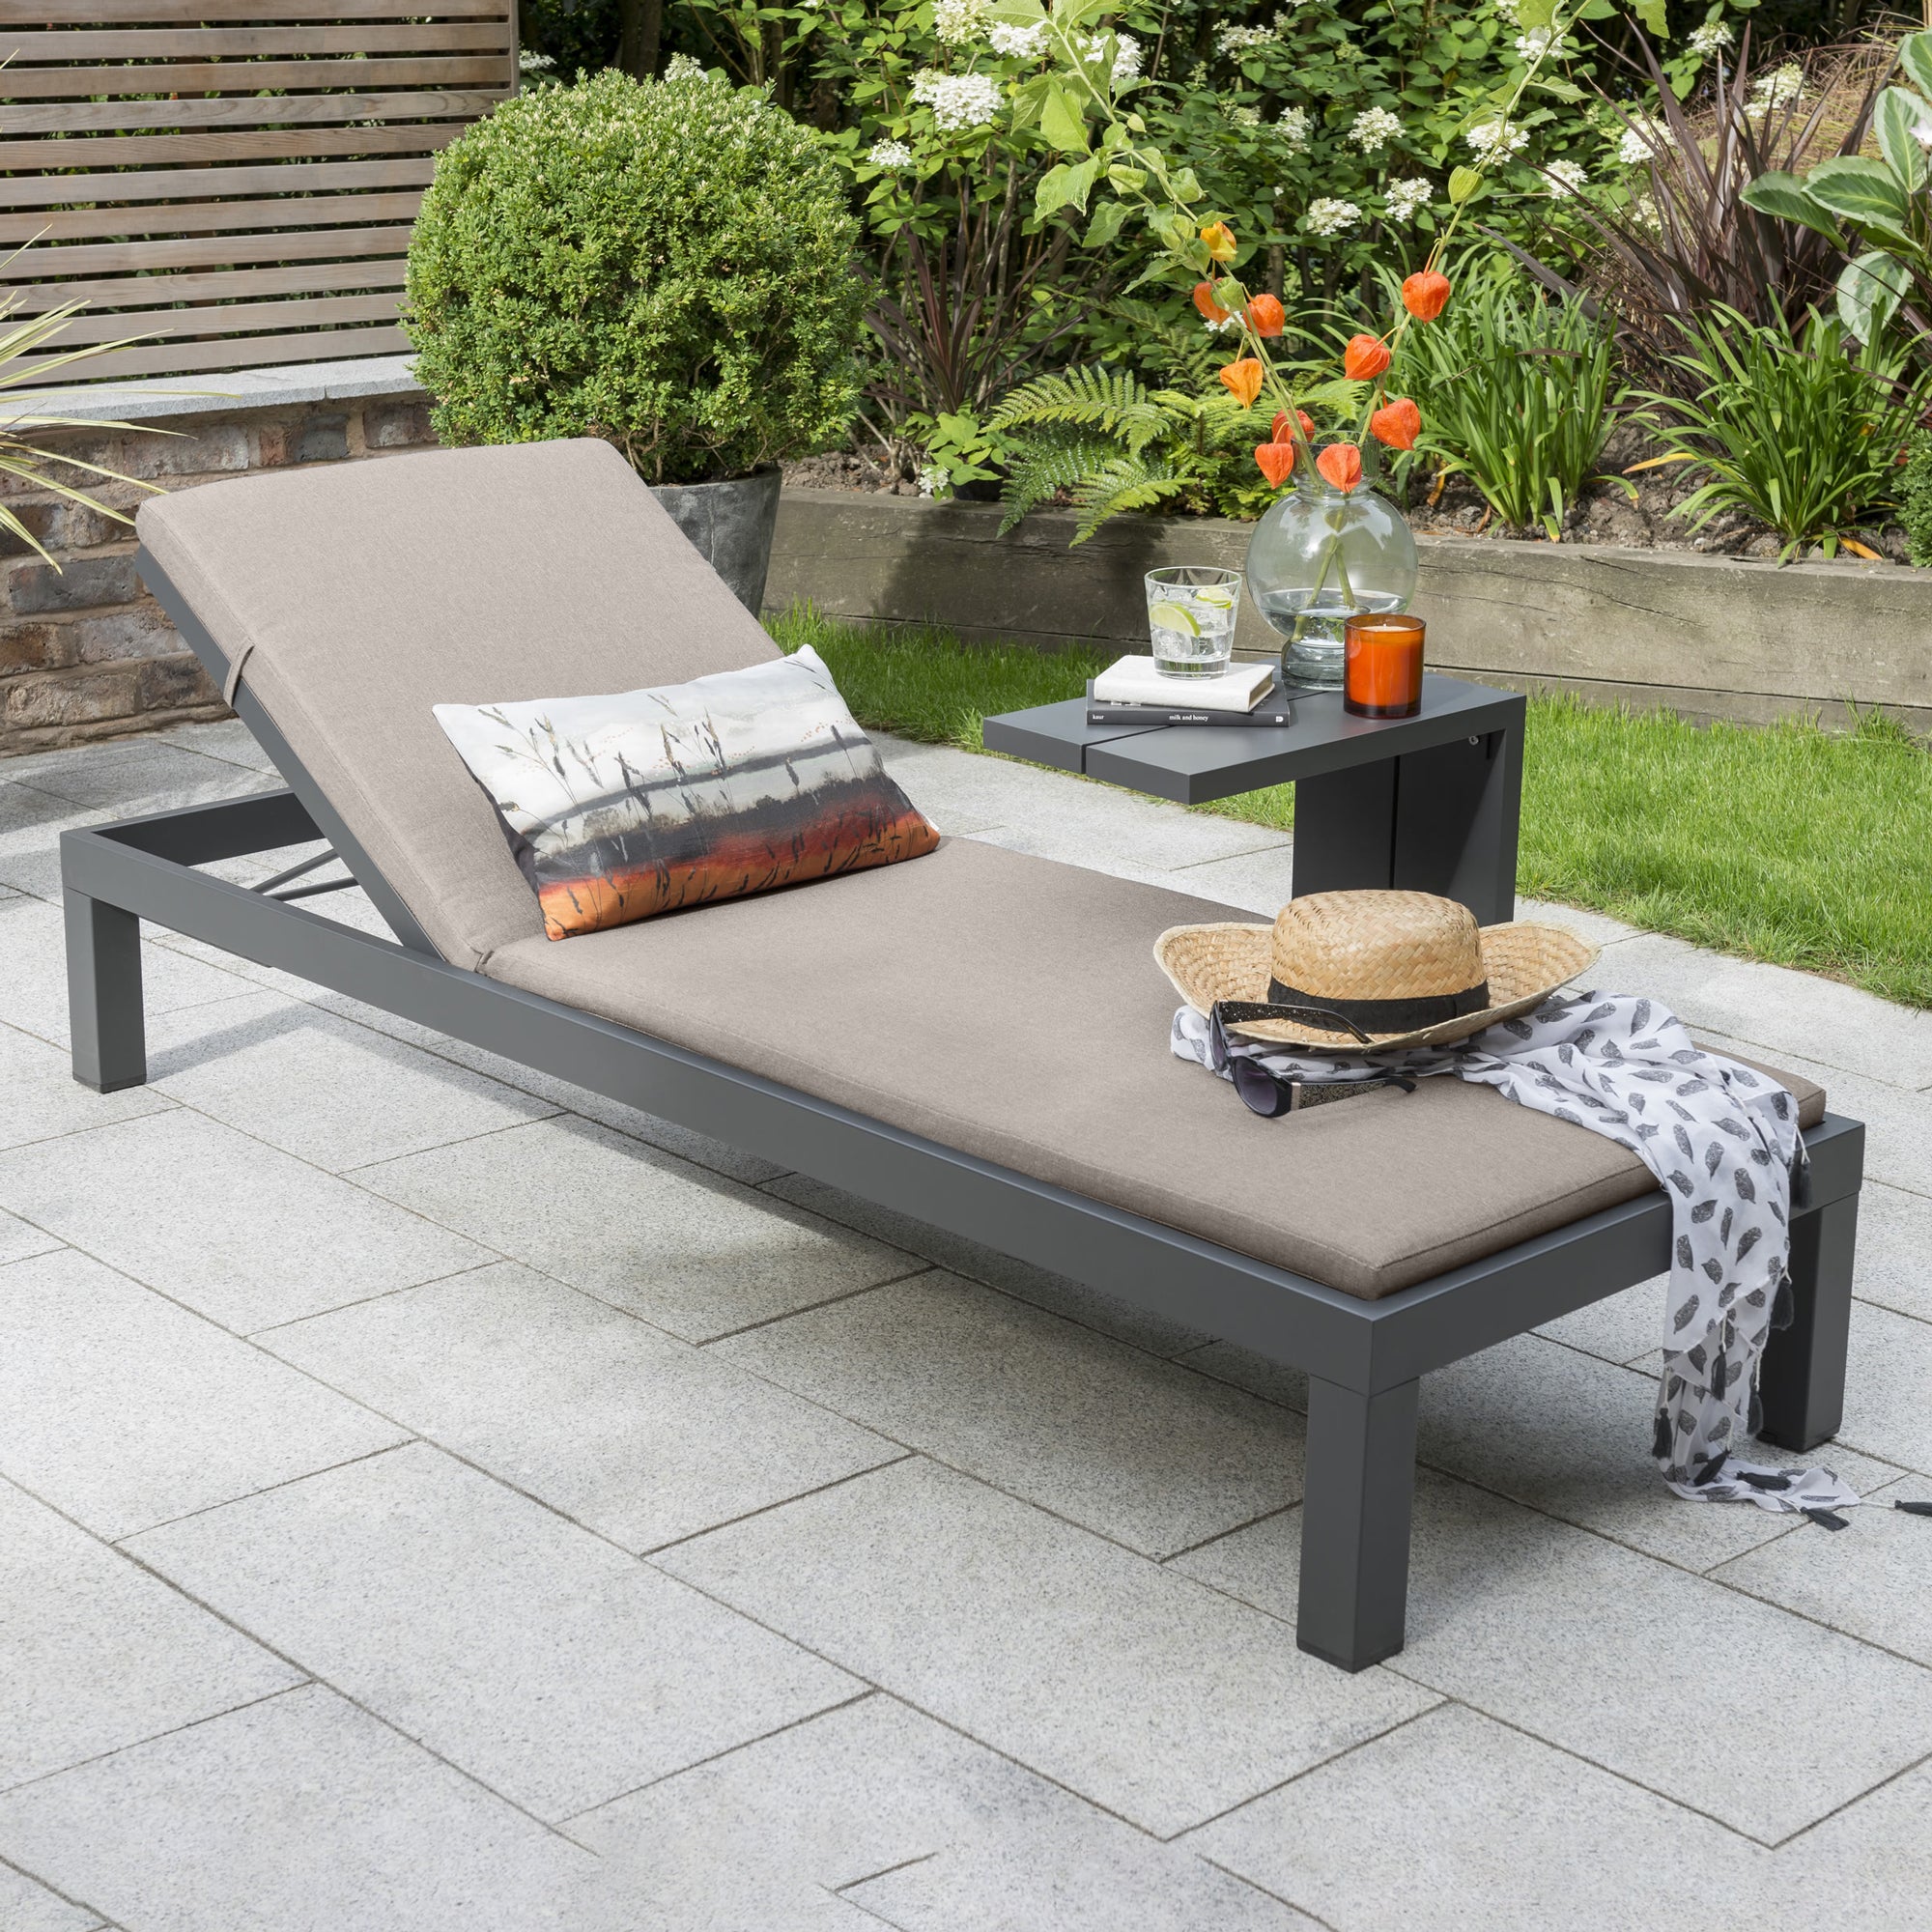 Elba Multi-Position Lounger with Cushion